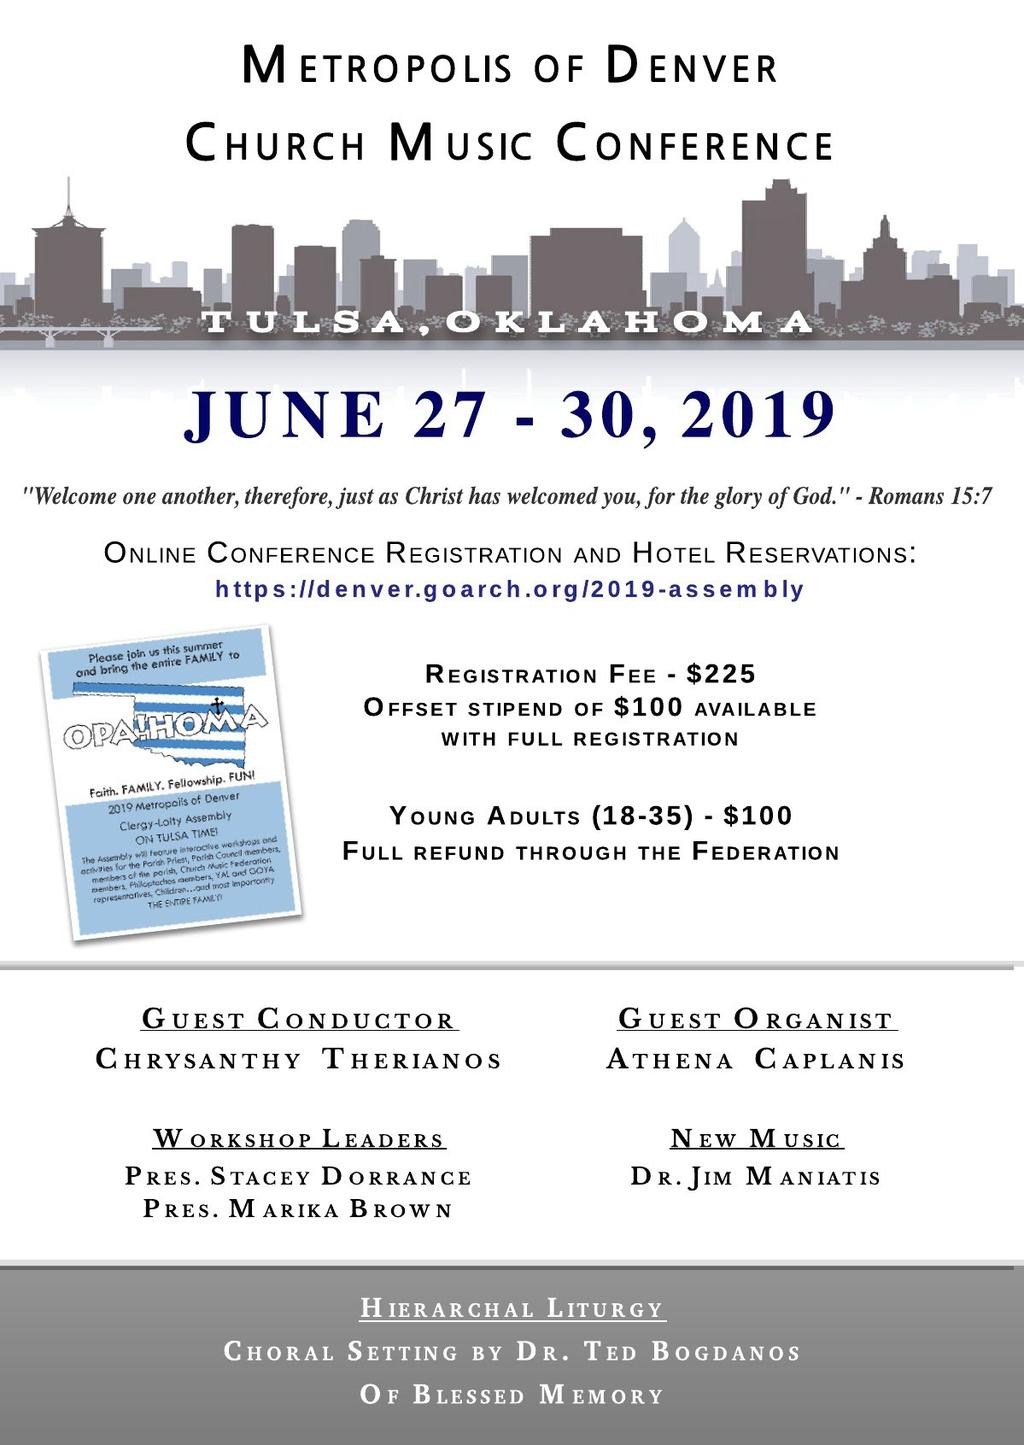 WEEKLY ANNOUNCEMENTS: June 23, 2019 The YAL Conference will be held in sunny southern California at the Hyatt Regency Long Beach, 200 S. Pine Avenue, Long Beach, CA.